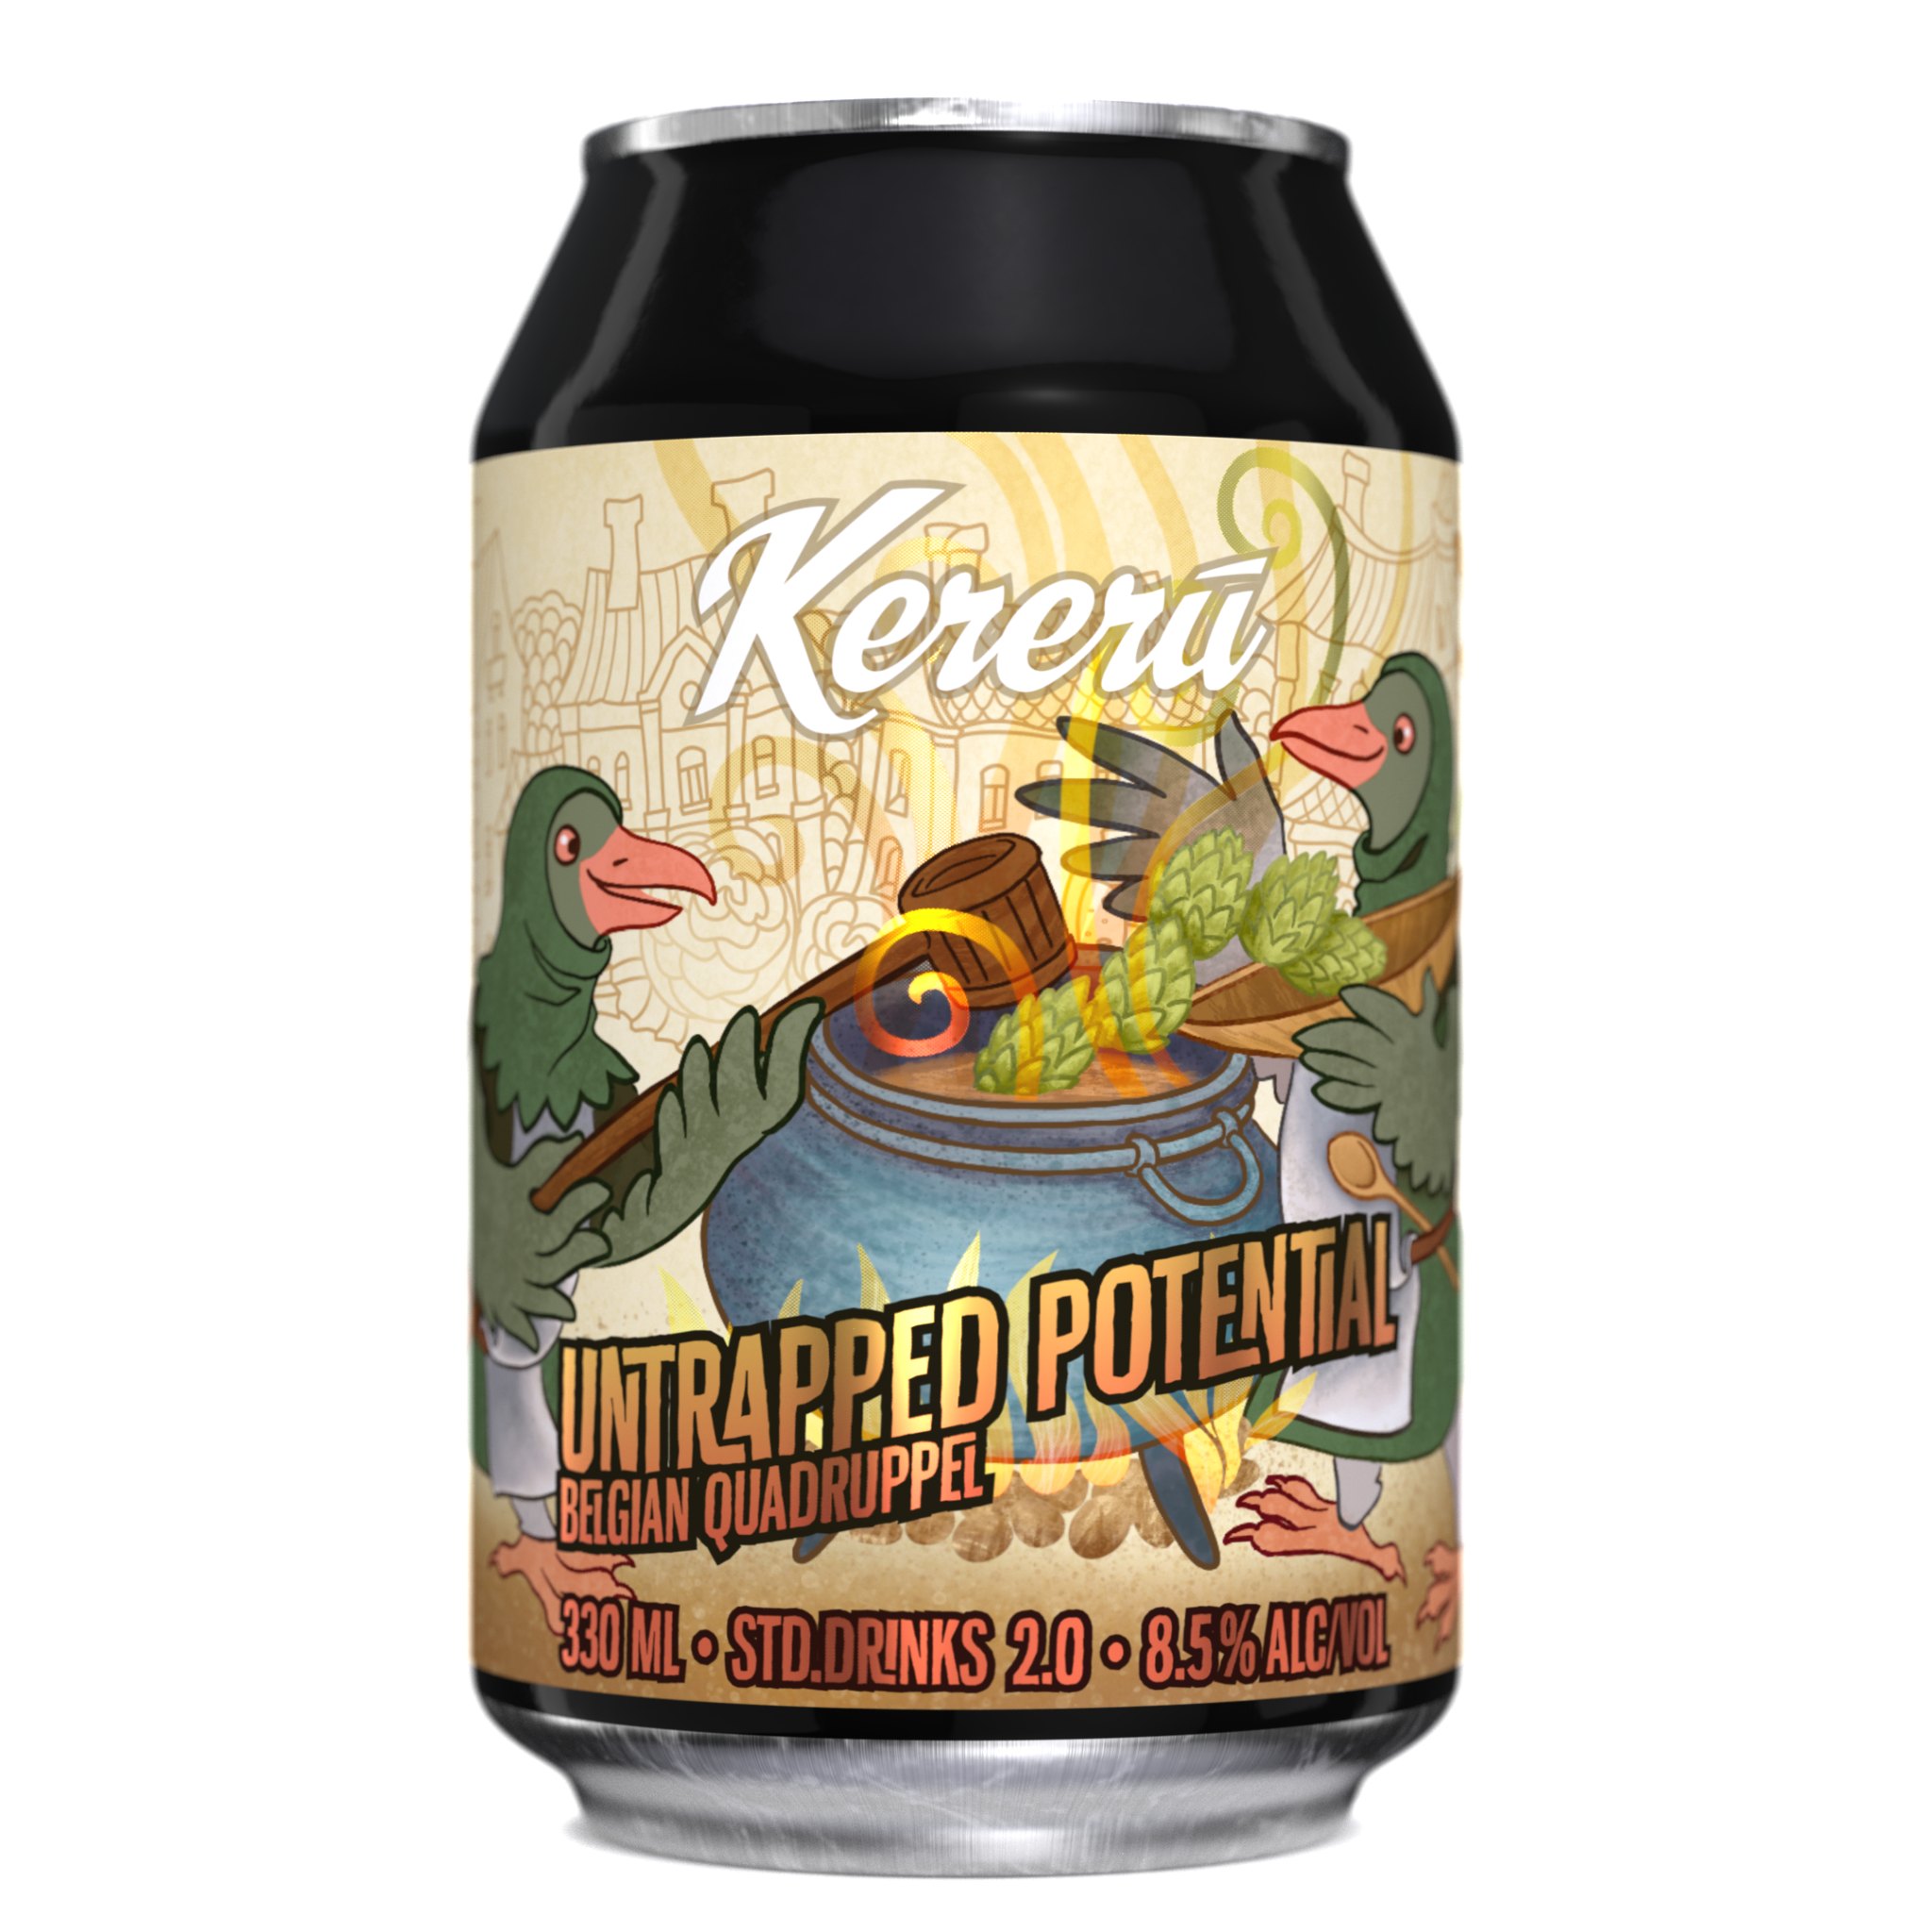 Featured Beer: Untrapped Potential